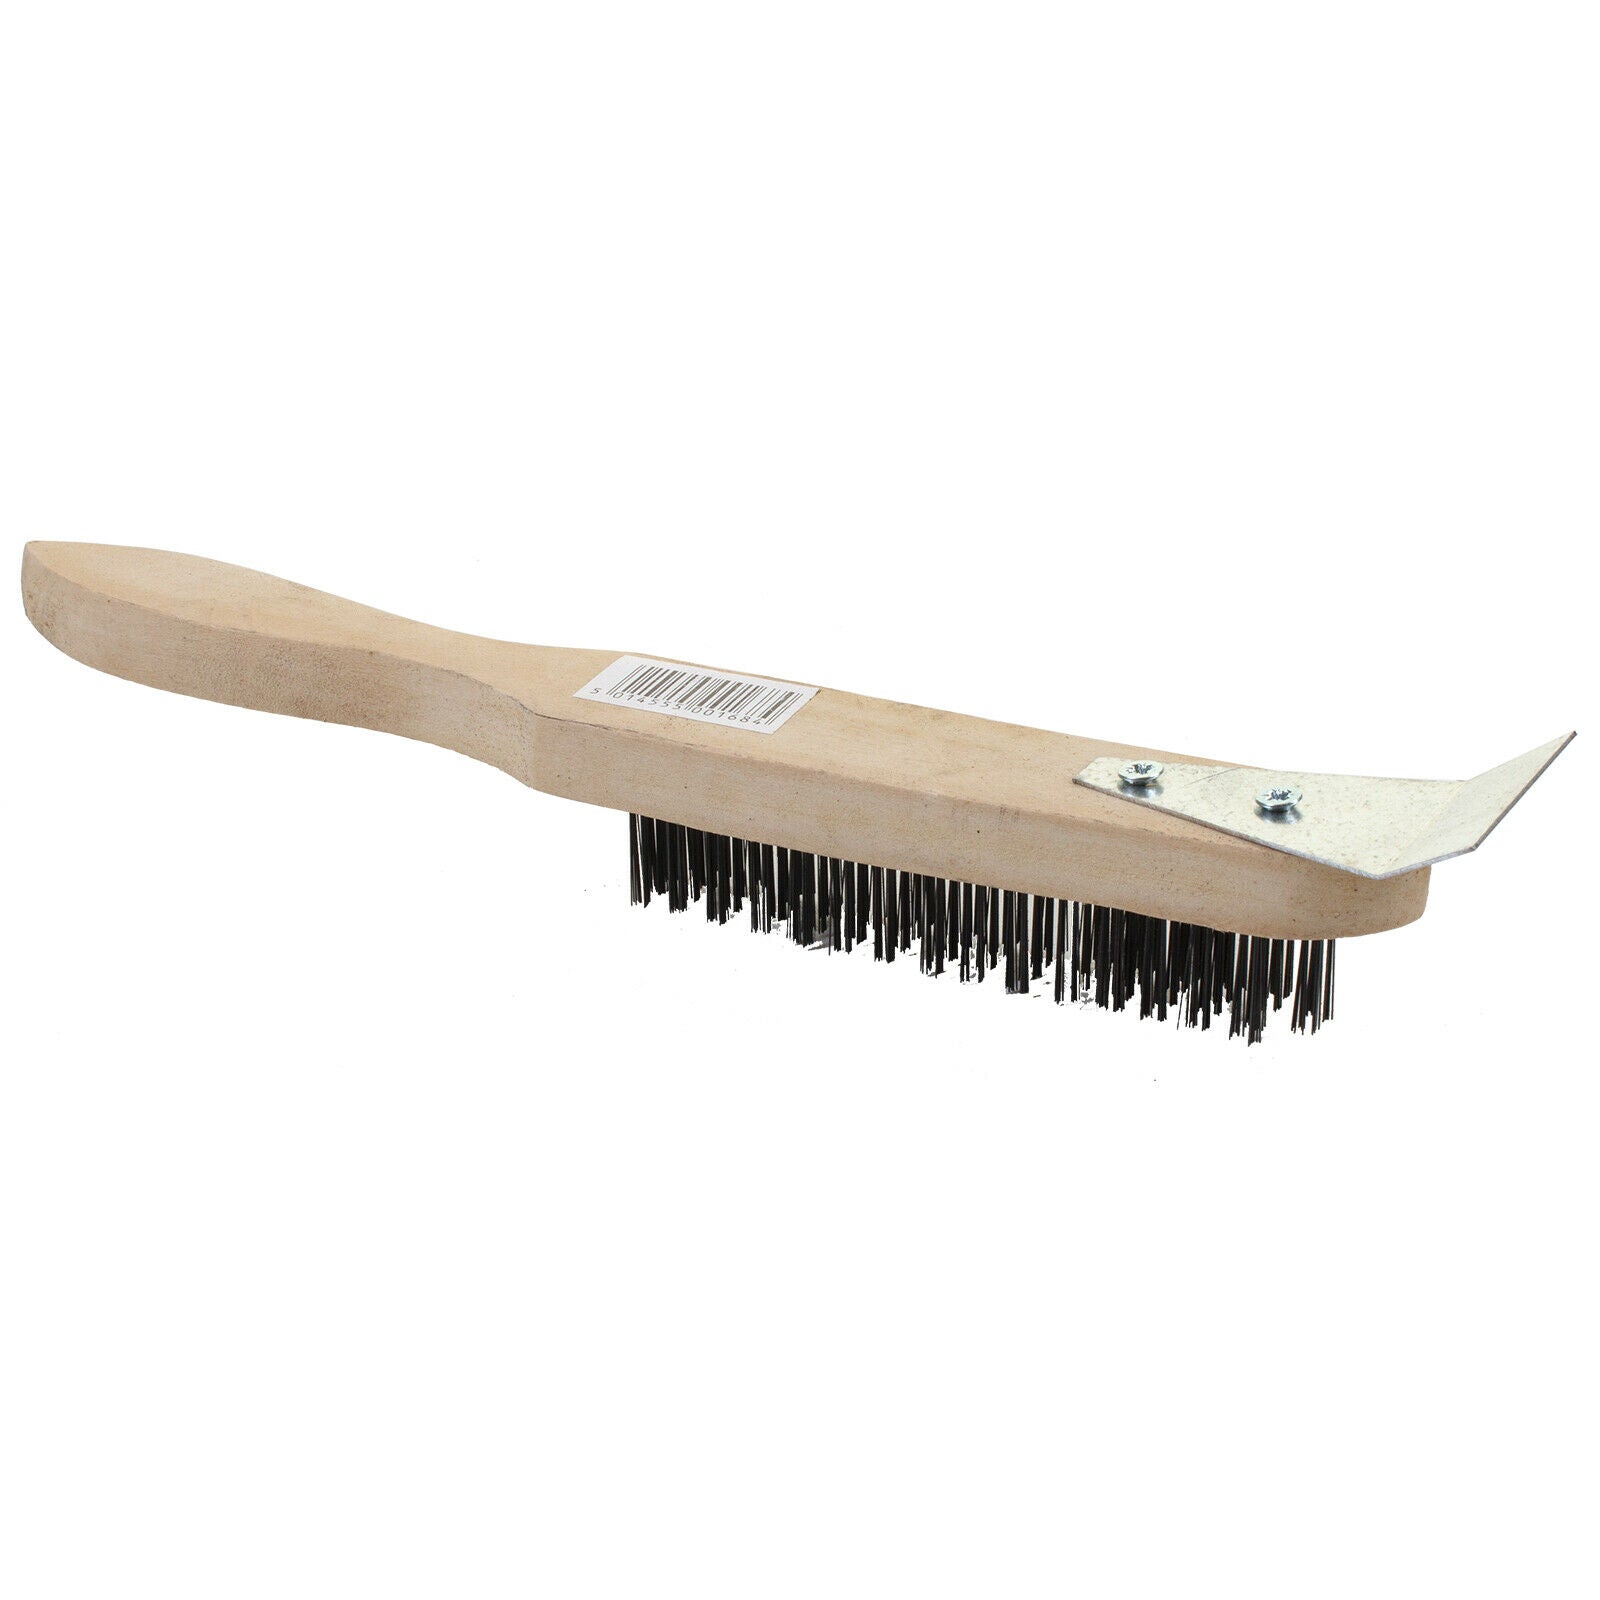 Wire Grill Brush Barbecue Cleaner Bristles Scraper With Wooden Handle.Product Ref:00314. IN STOCK